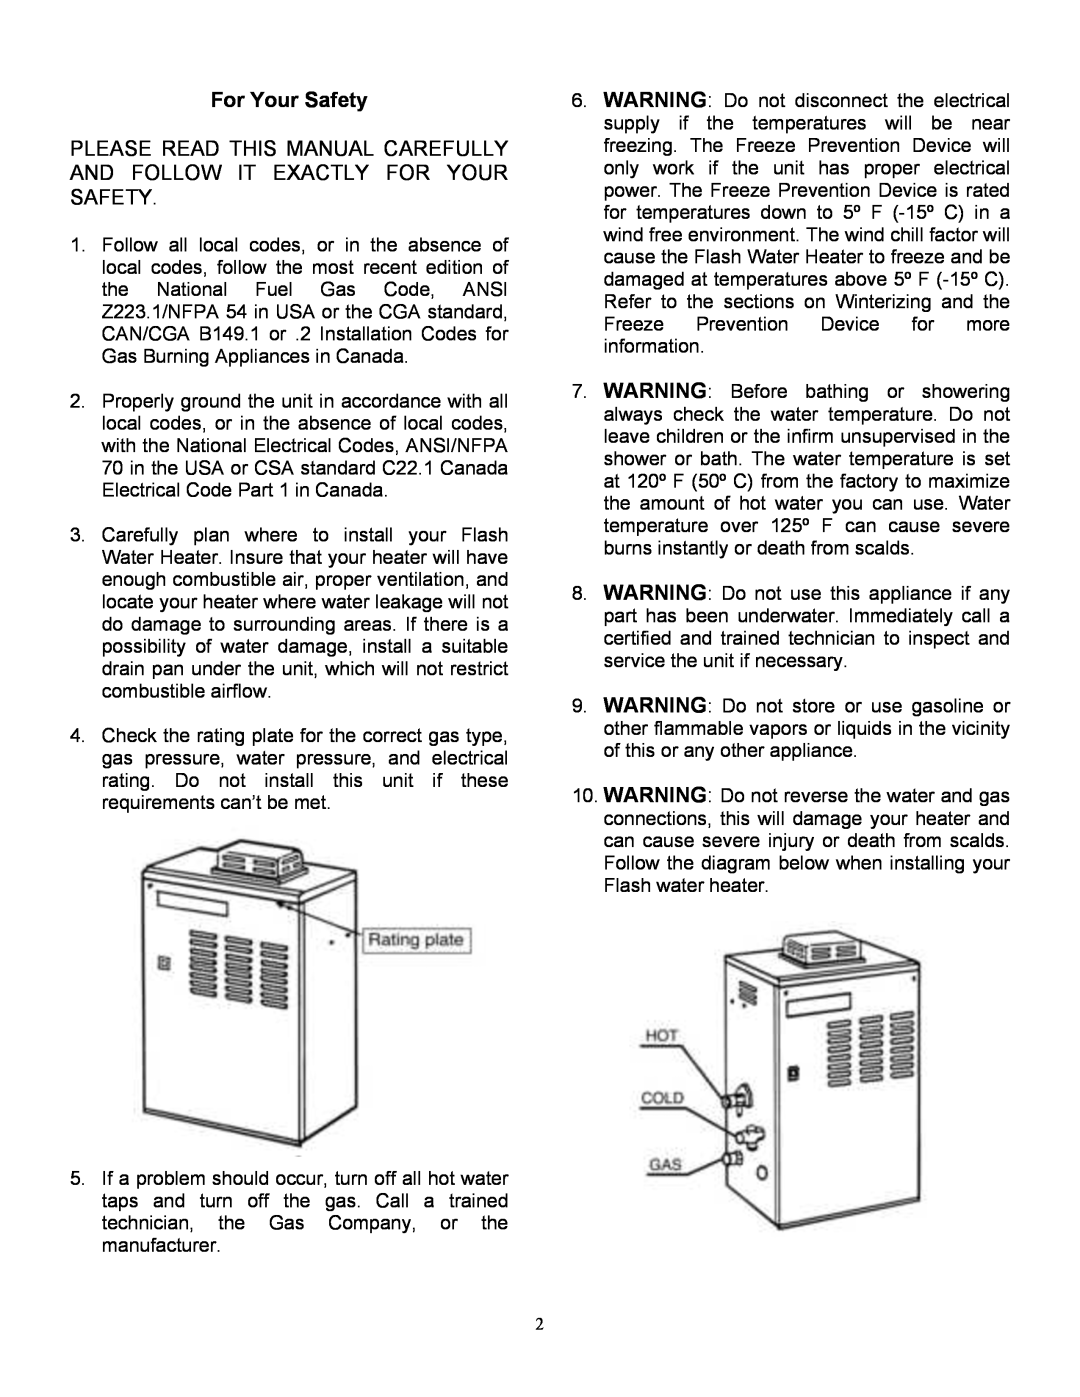 Whirlpool T-K1S installation manual For Your Safety 